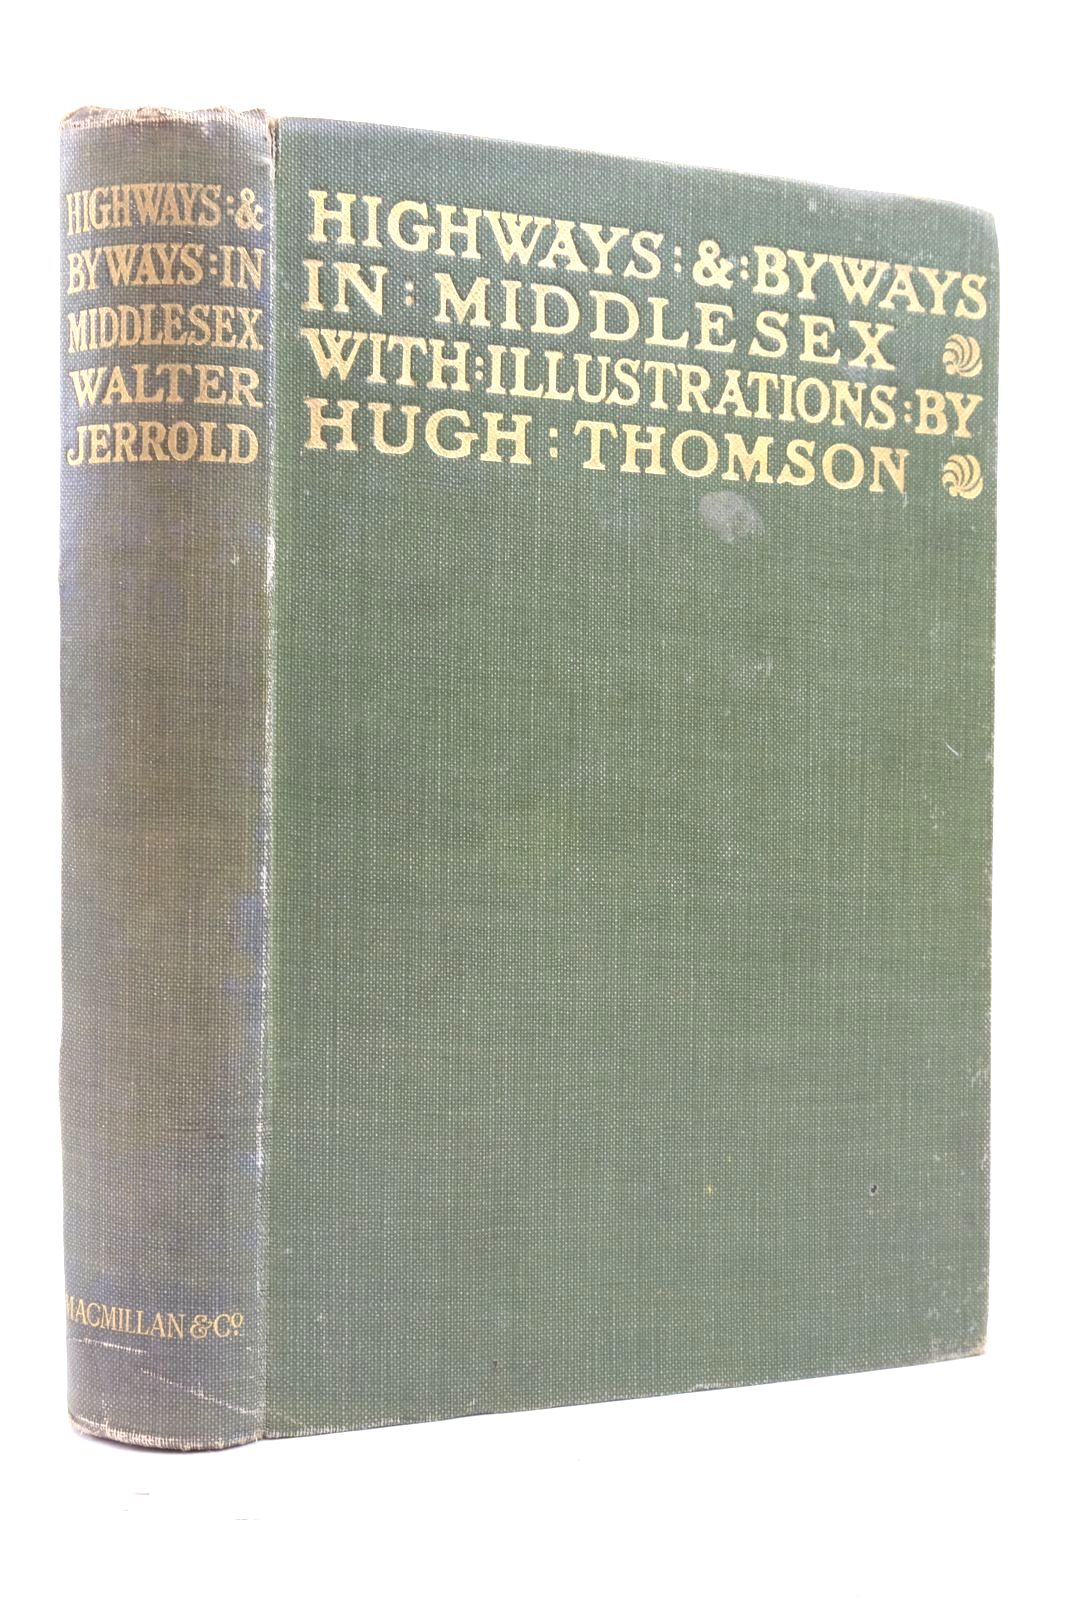 Photo of HIGHWAYS AND BYWAYS IN MIDDLESEX written by Jerrold, Walter illustrated by Thomson, Hugh published by Macmillan &amp; Co. Ltd. (STOCK CODE: 2137635)  for sale by Stella & Rose's Books